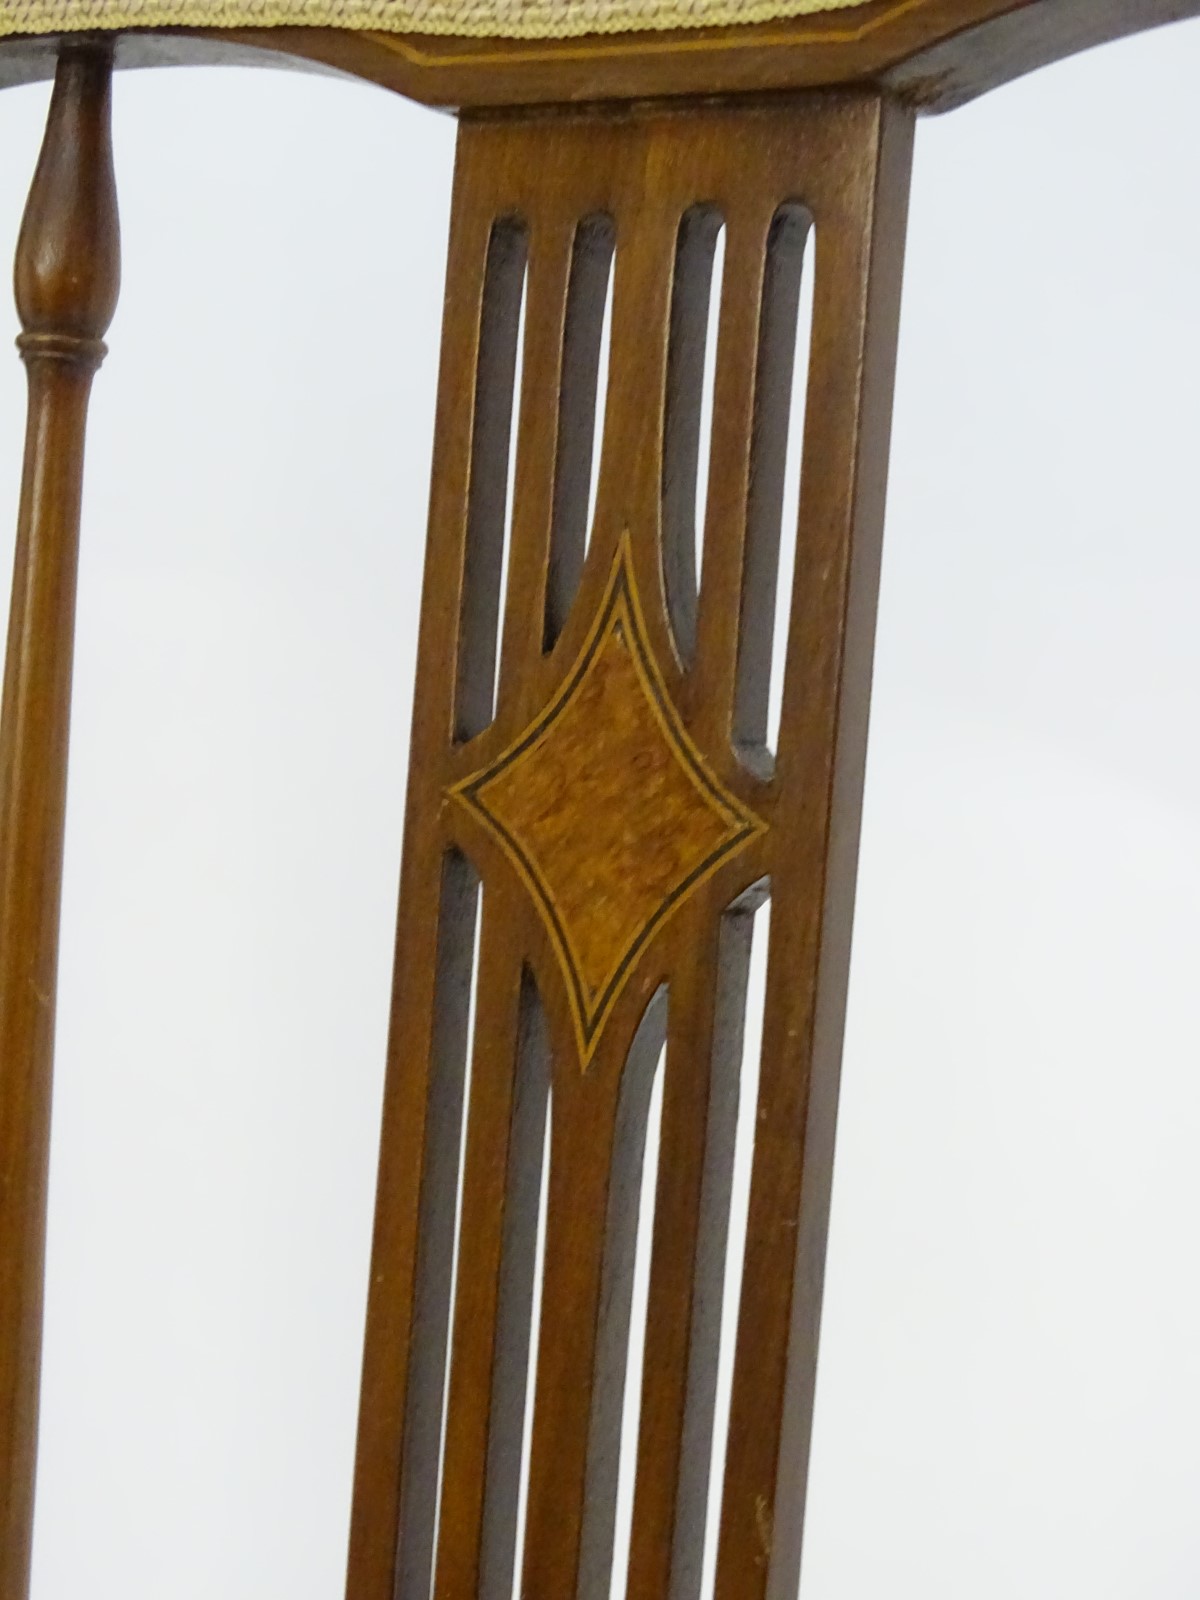 An early 20thC mahogany bedroom chair with a slatted backrest and inlaid decoration, - Image 5 of 9